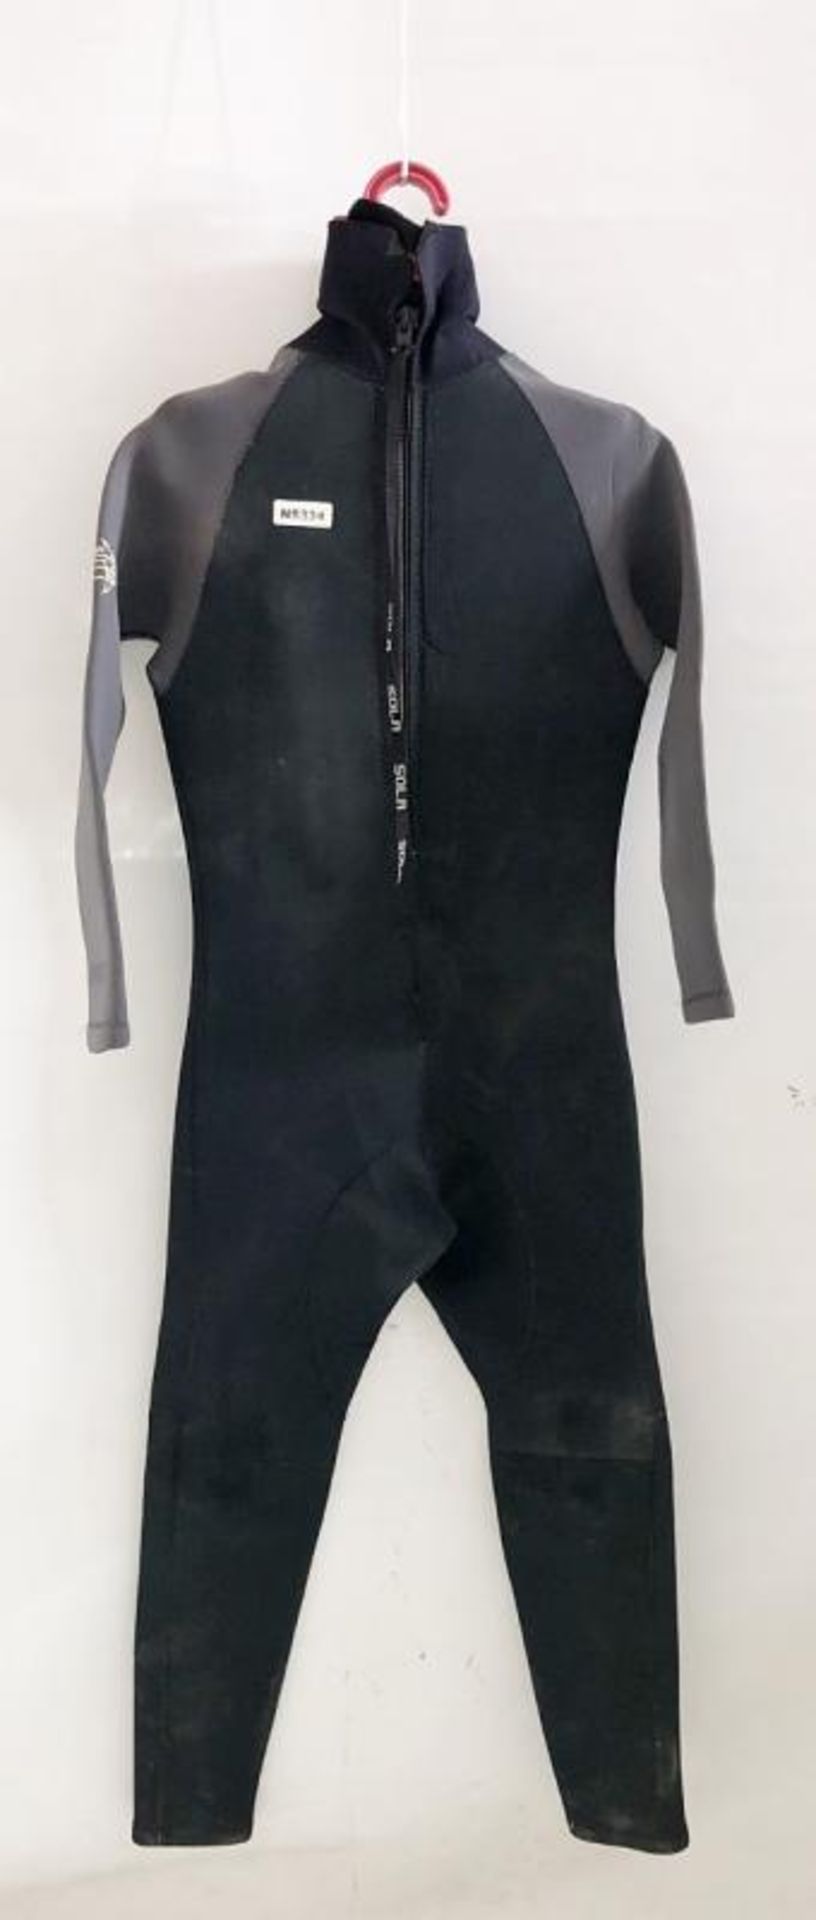 1 x Grey and Black Sola Thousand Island Diving Wetsuit - Ref: NS334 - CL349 - Location: Altrincham W